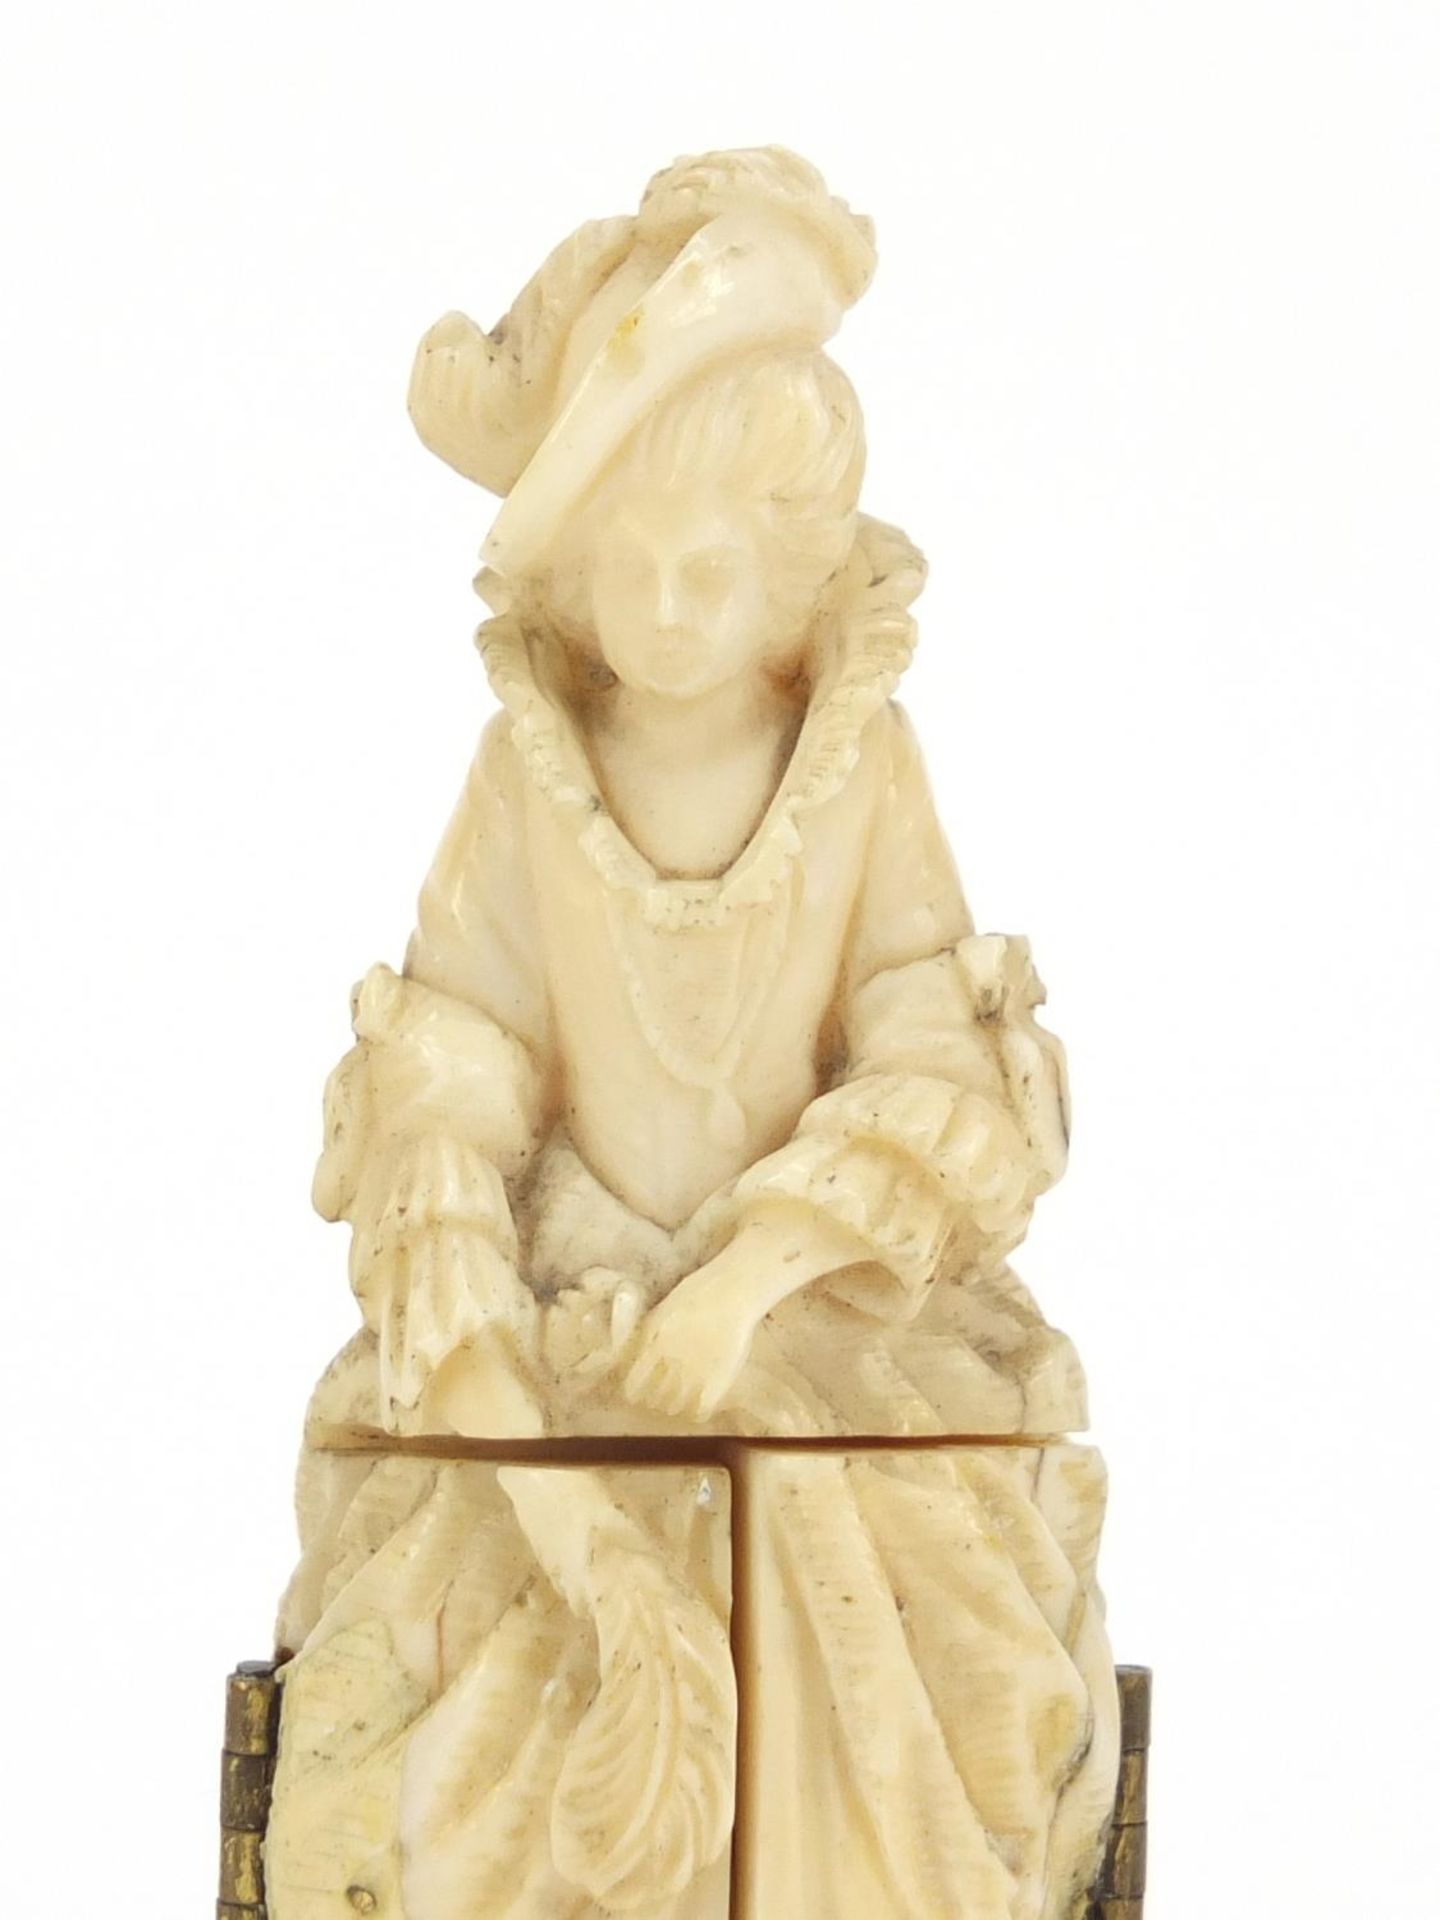 19th century French Dieppe carved ivory tryptych figure, 9cm high - Image 4 of 9